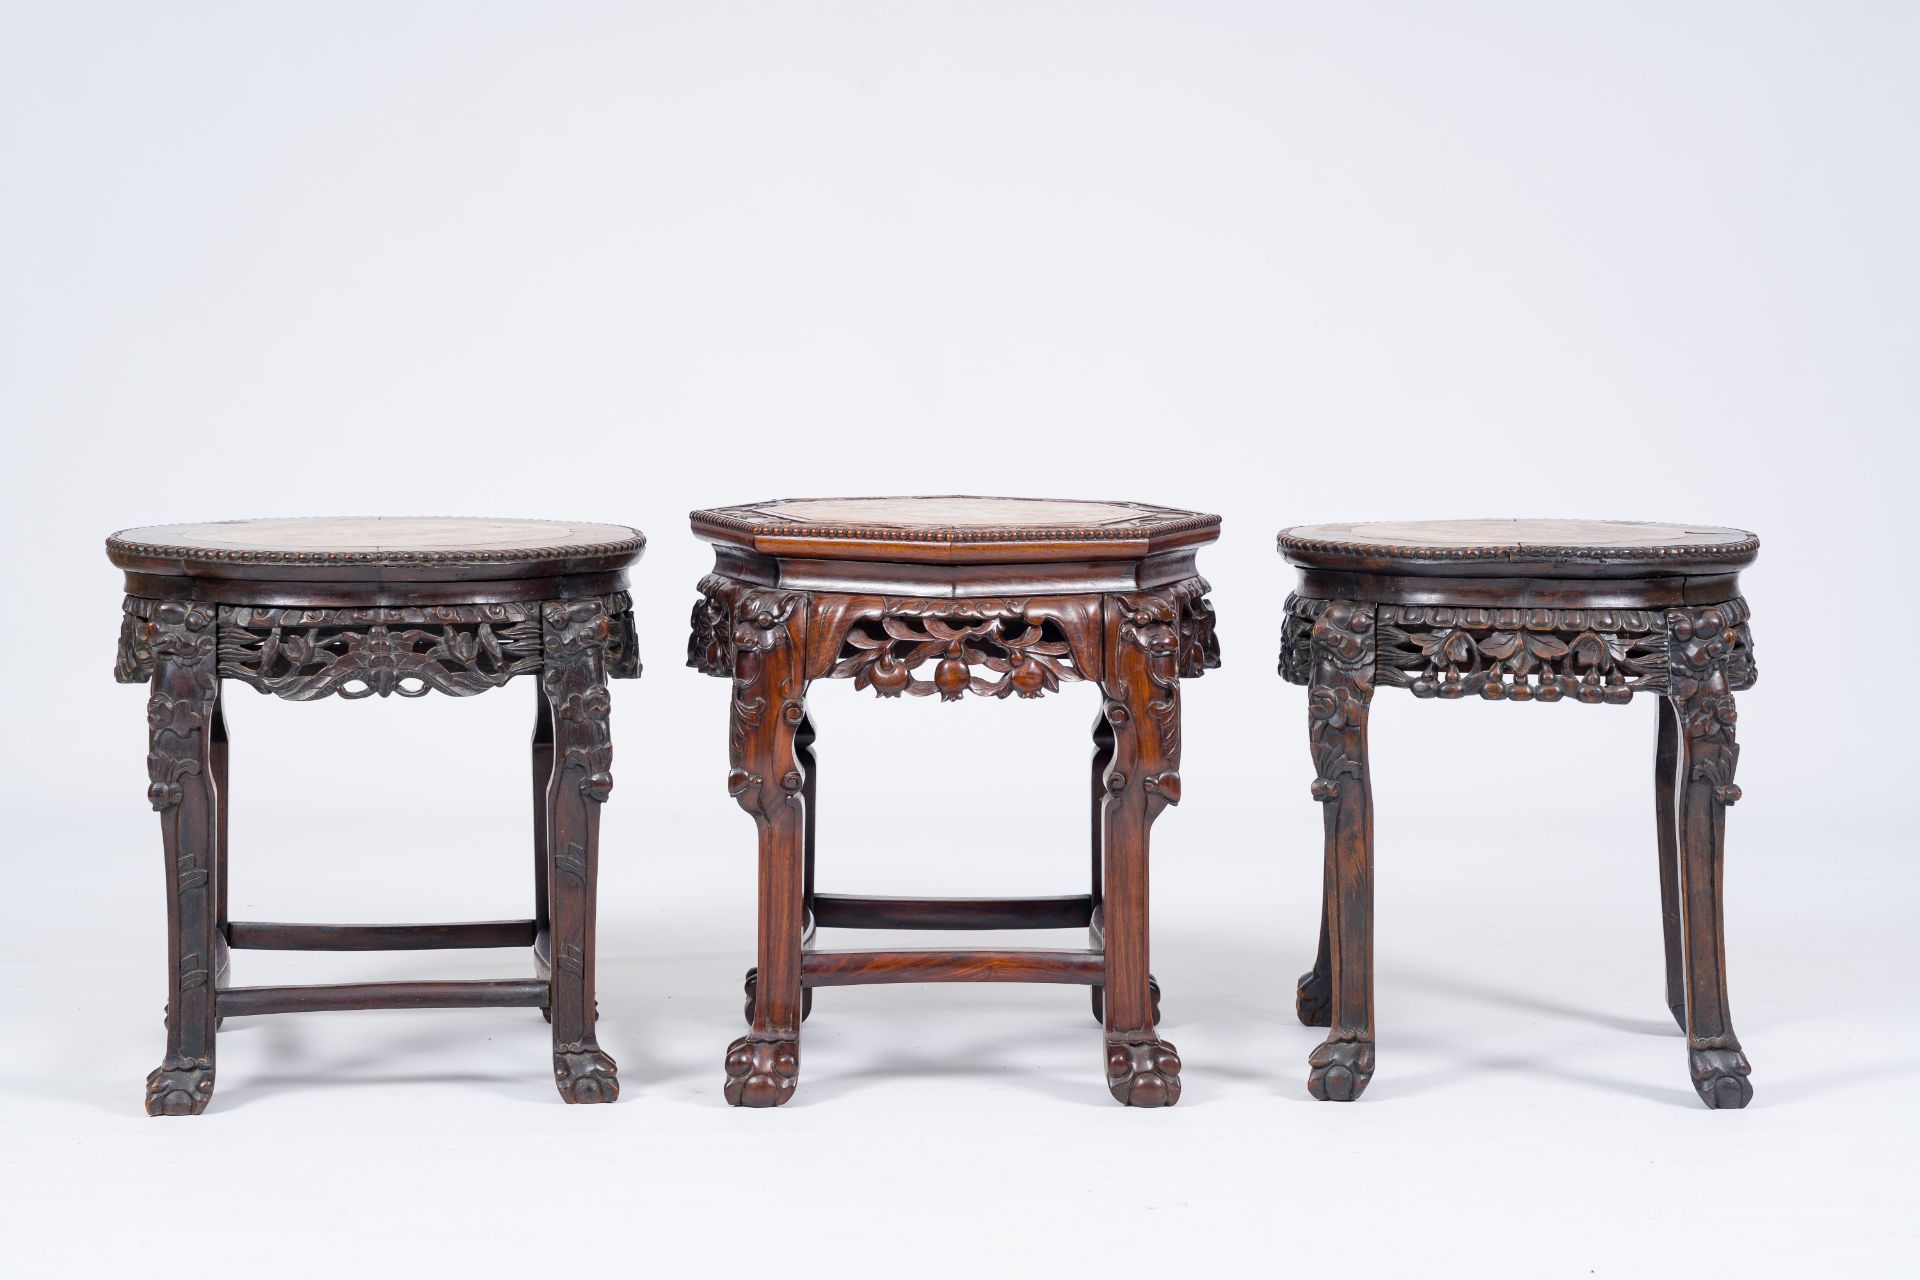 Three Chinese reticulated hardwood stands with marble tops, 20th C. - Image 2 of 7